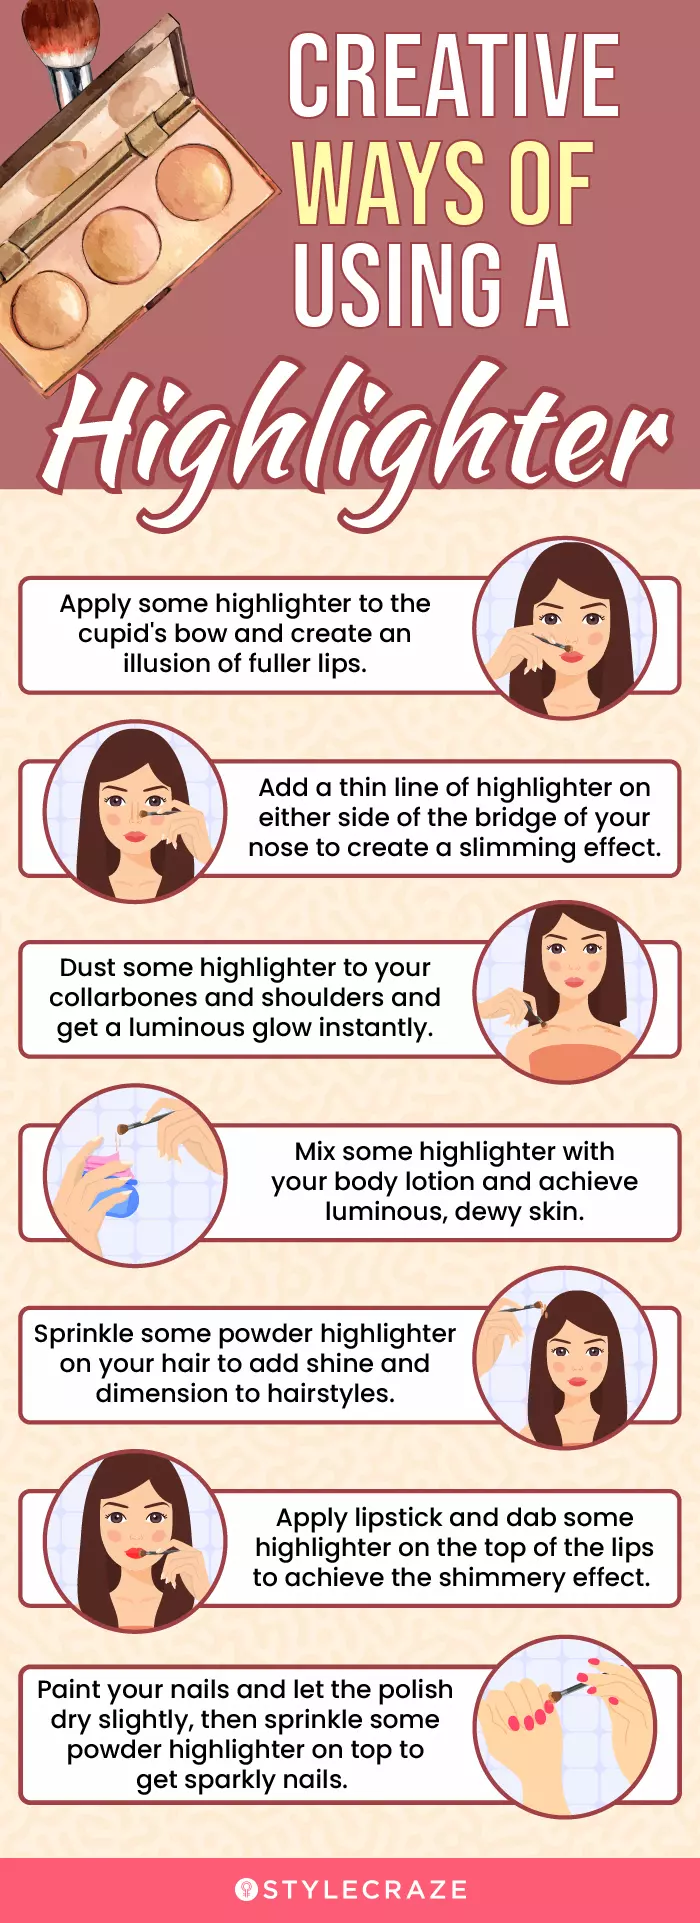 Creative Ways Of Using A Highlighter (infographic)